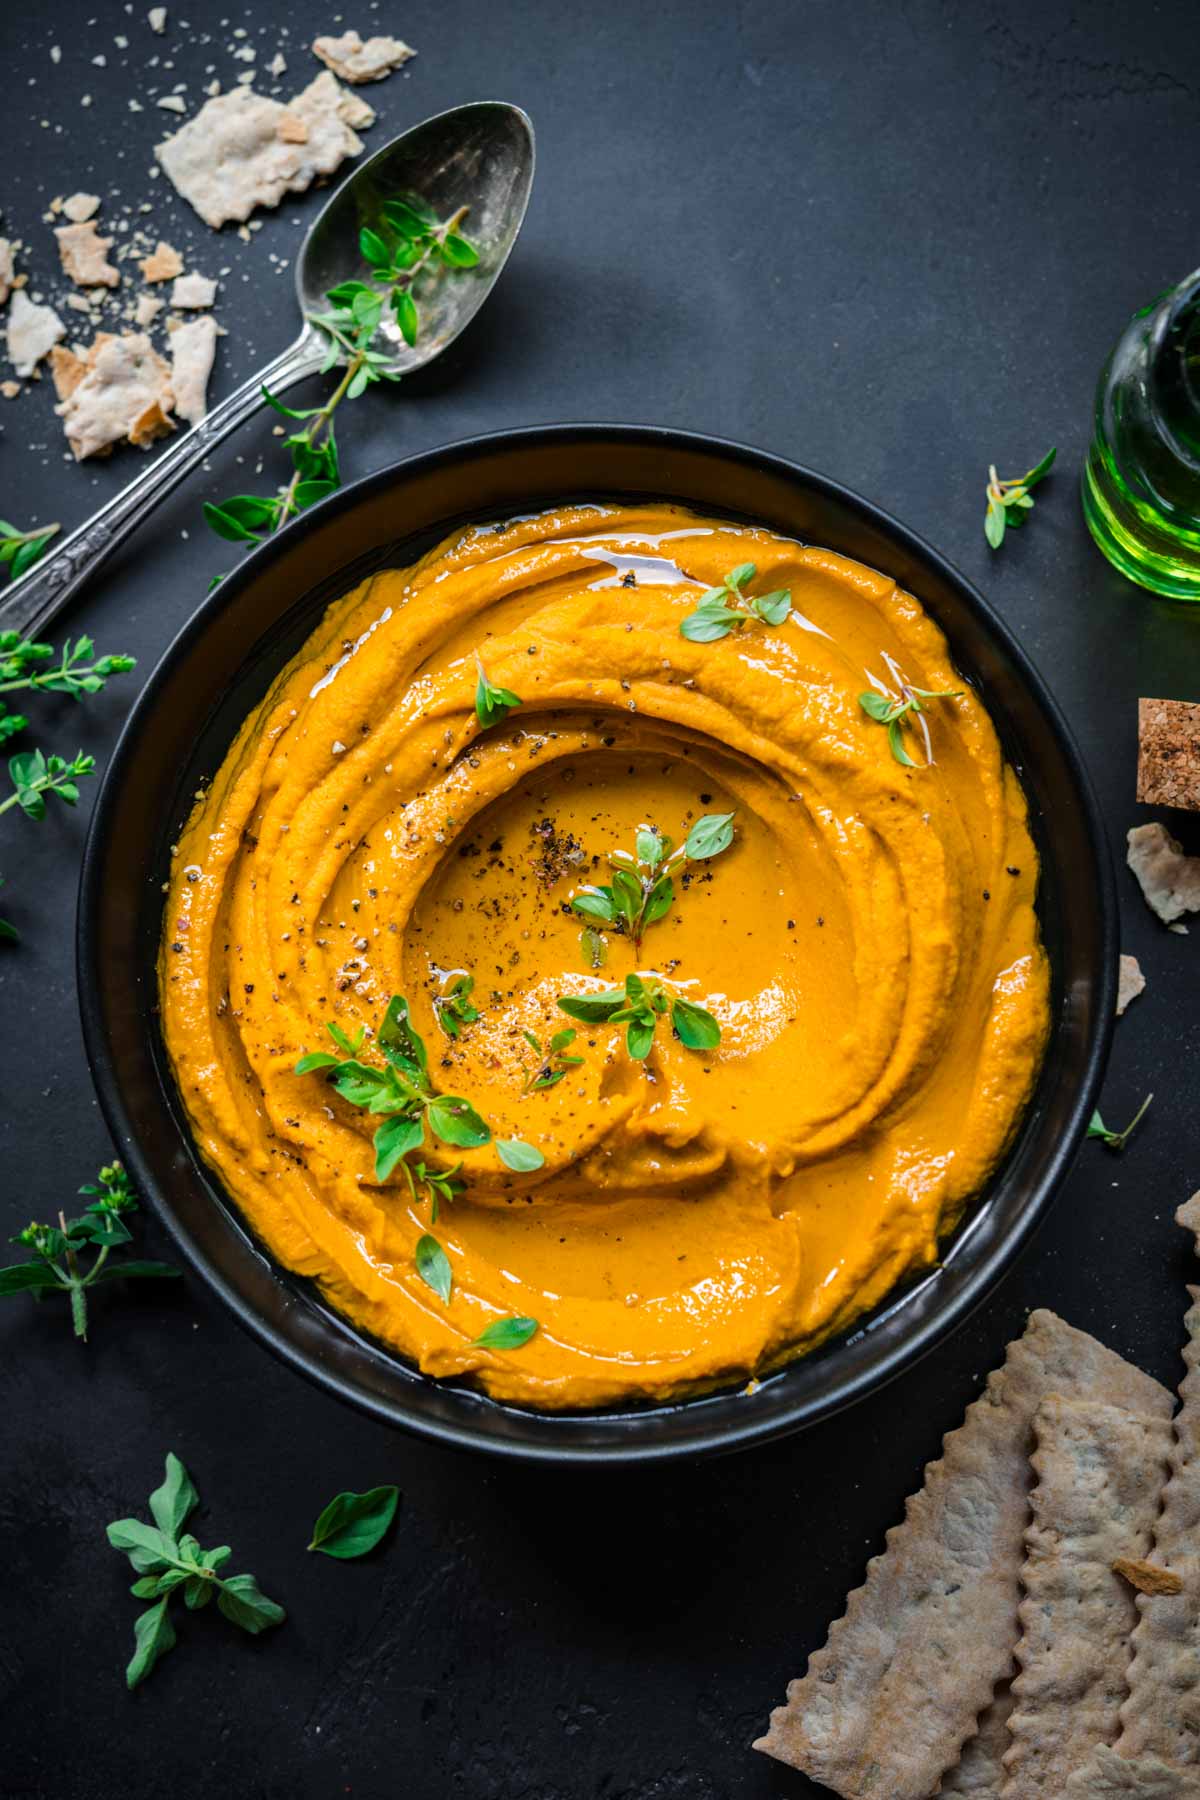 Roasted carrot dip in a bowl seen from above garnished with olive oil and herbs.